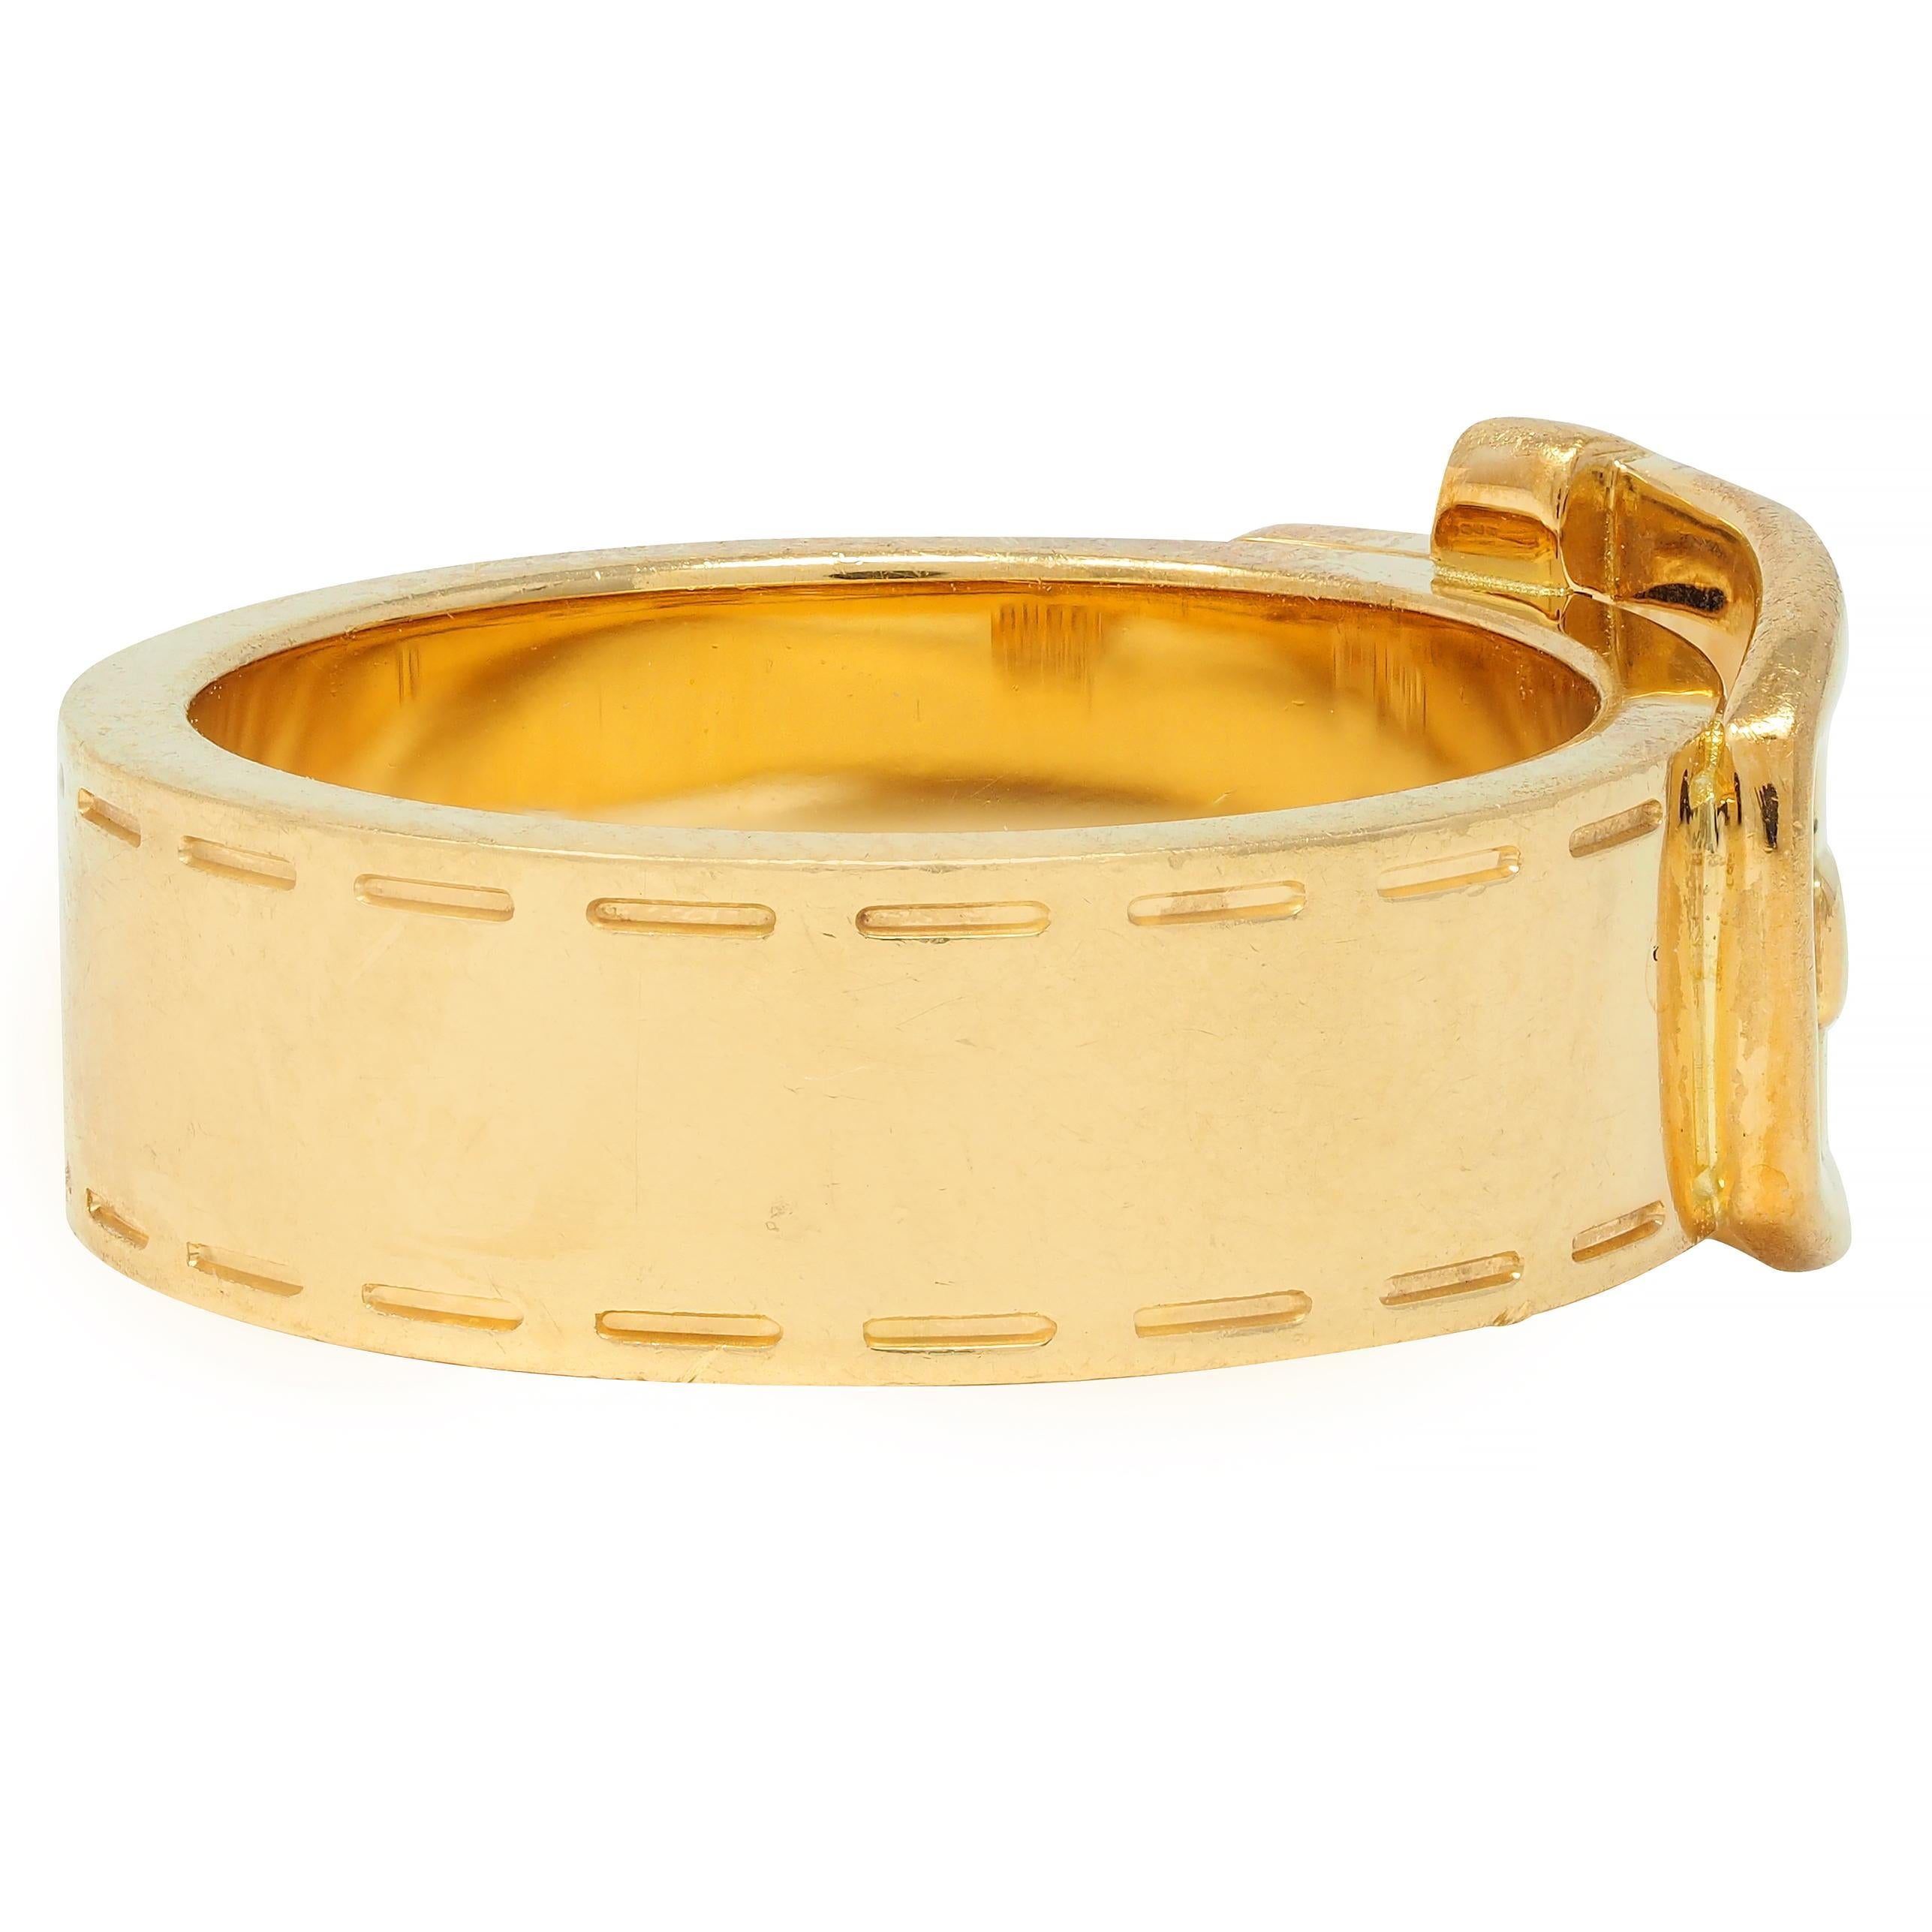 Designed as a wide band with a stylized belt buckle motif appliqué
Buckle is inscribe with 'GUCCI' logo 
Accented by stitch motif engraving along edges
Completed by high polish finish
Stamped with Italian assay marks for 18 karat gold 
Fully signed